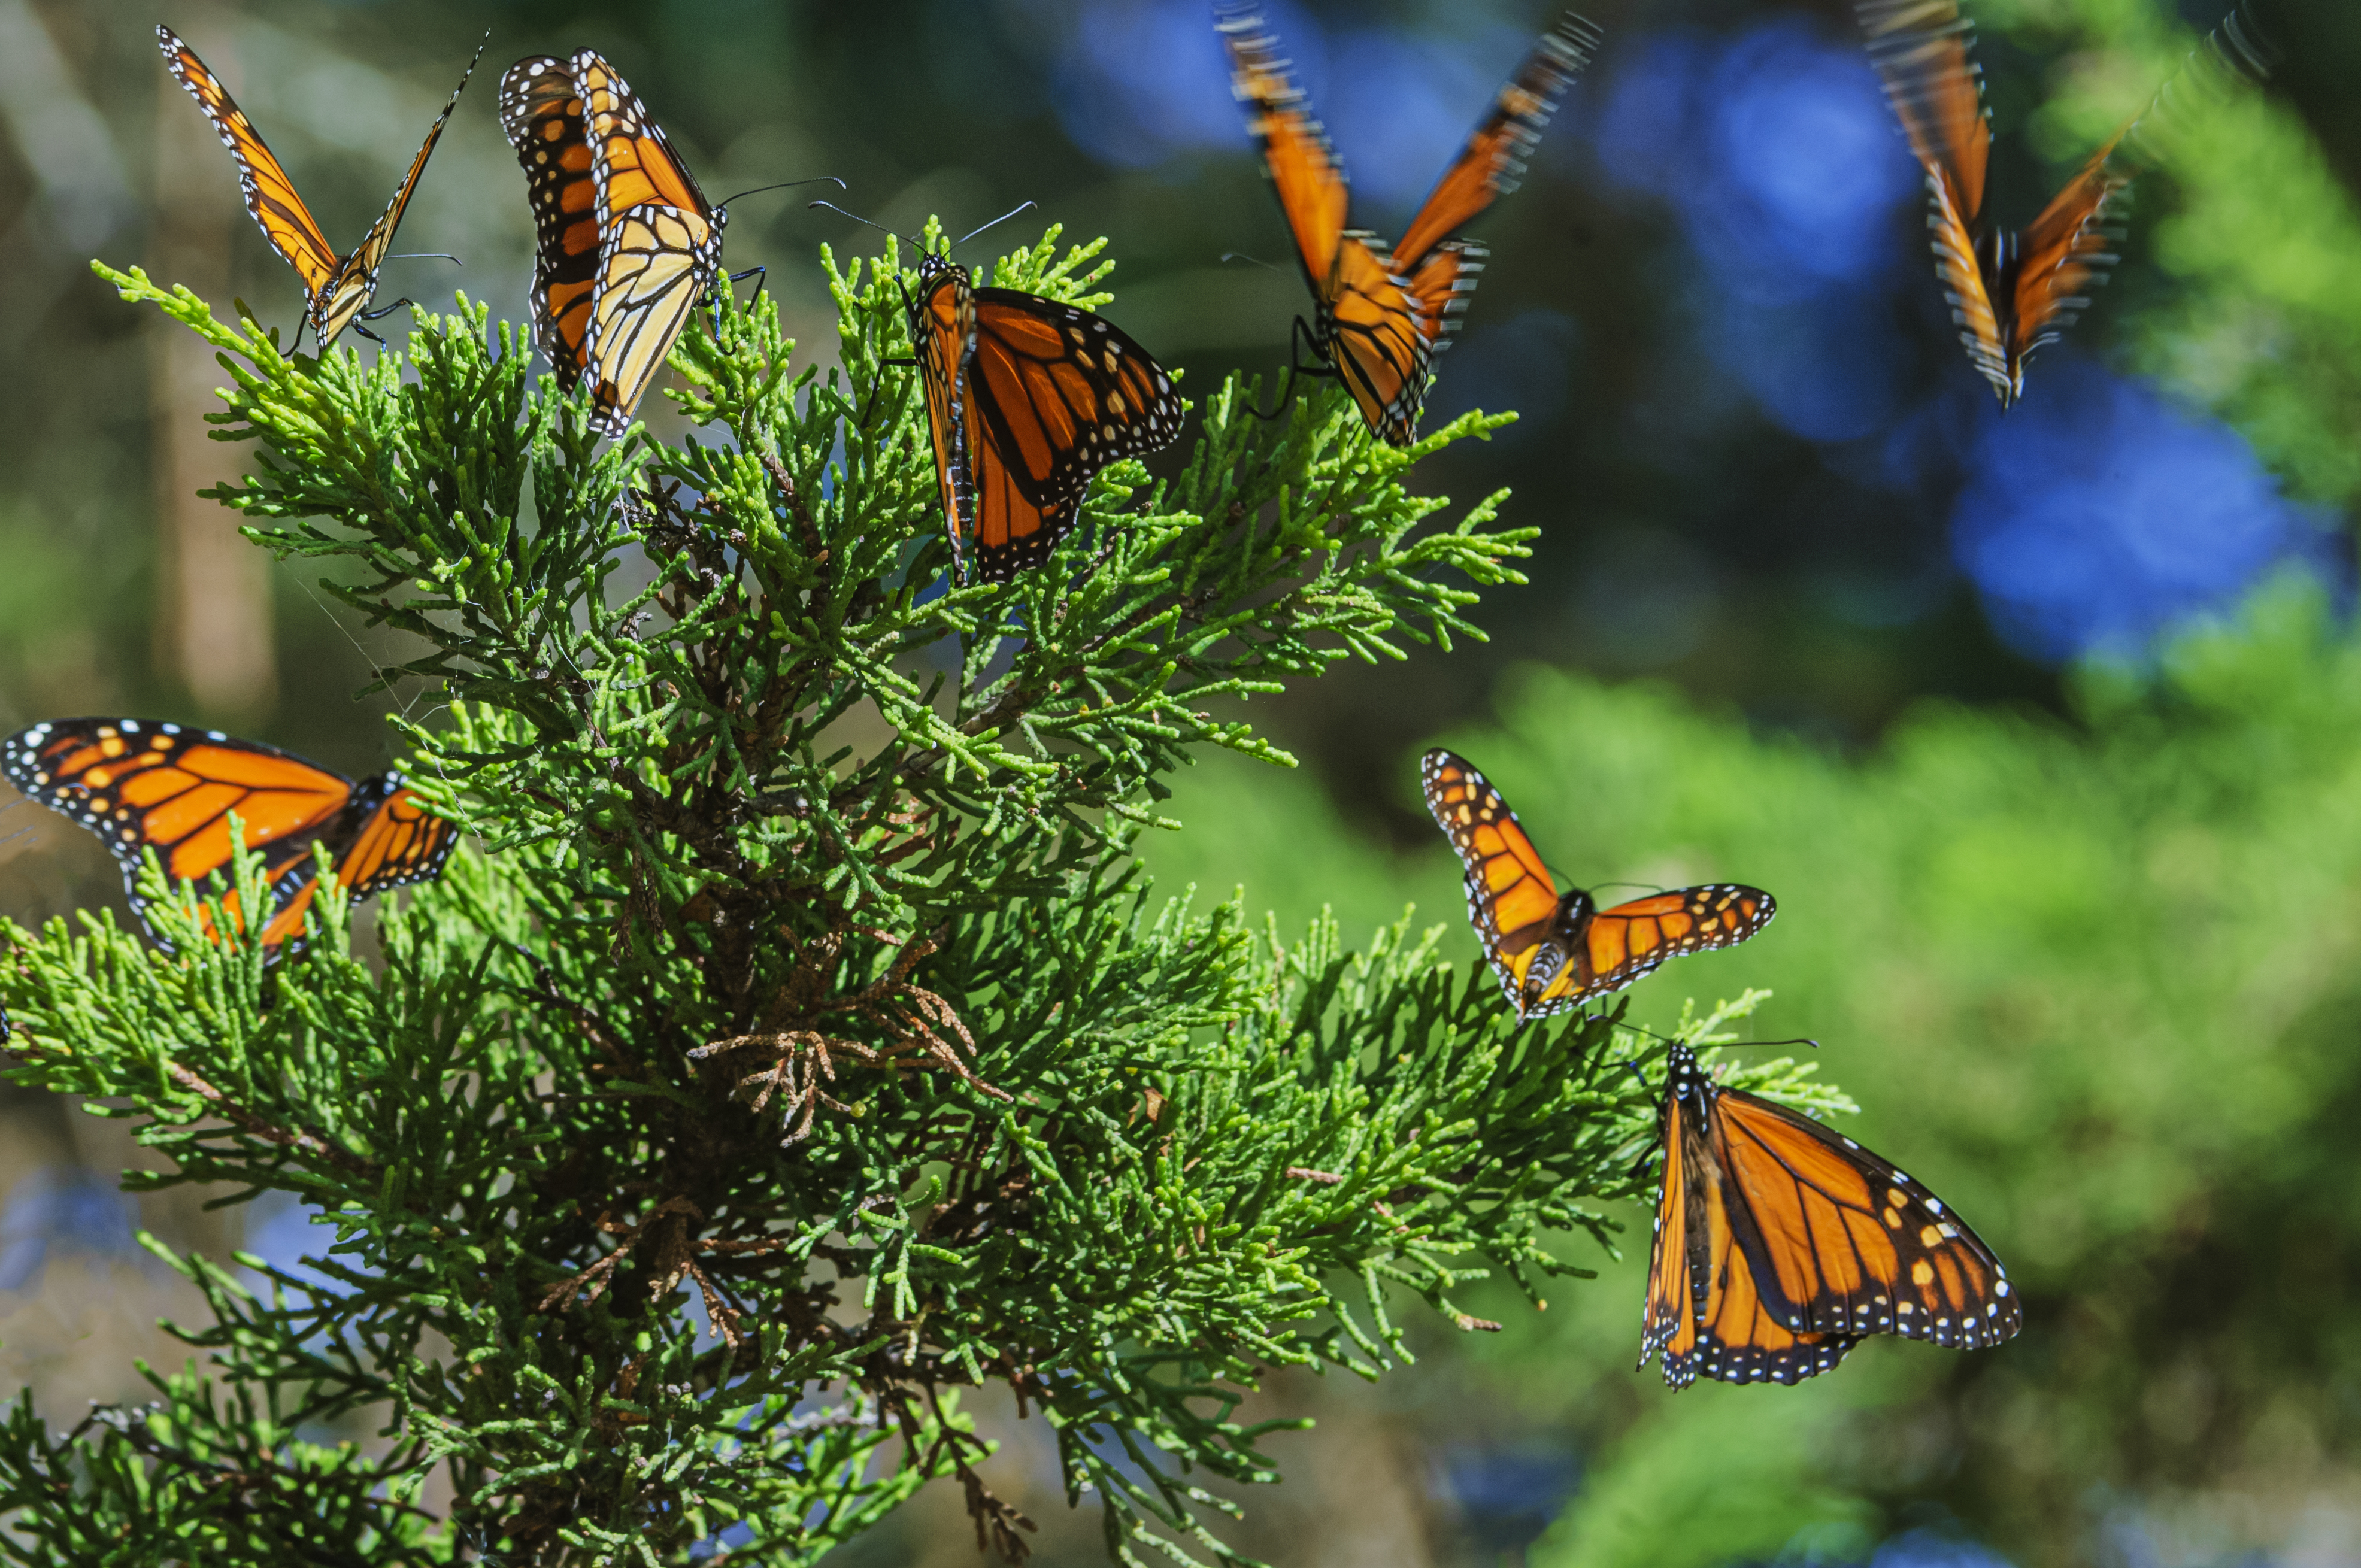 Several monarch butterflies resting and flying around a green bush